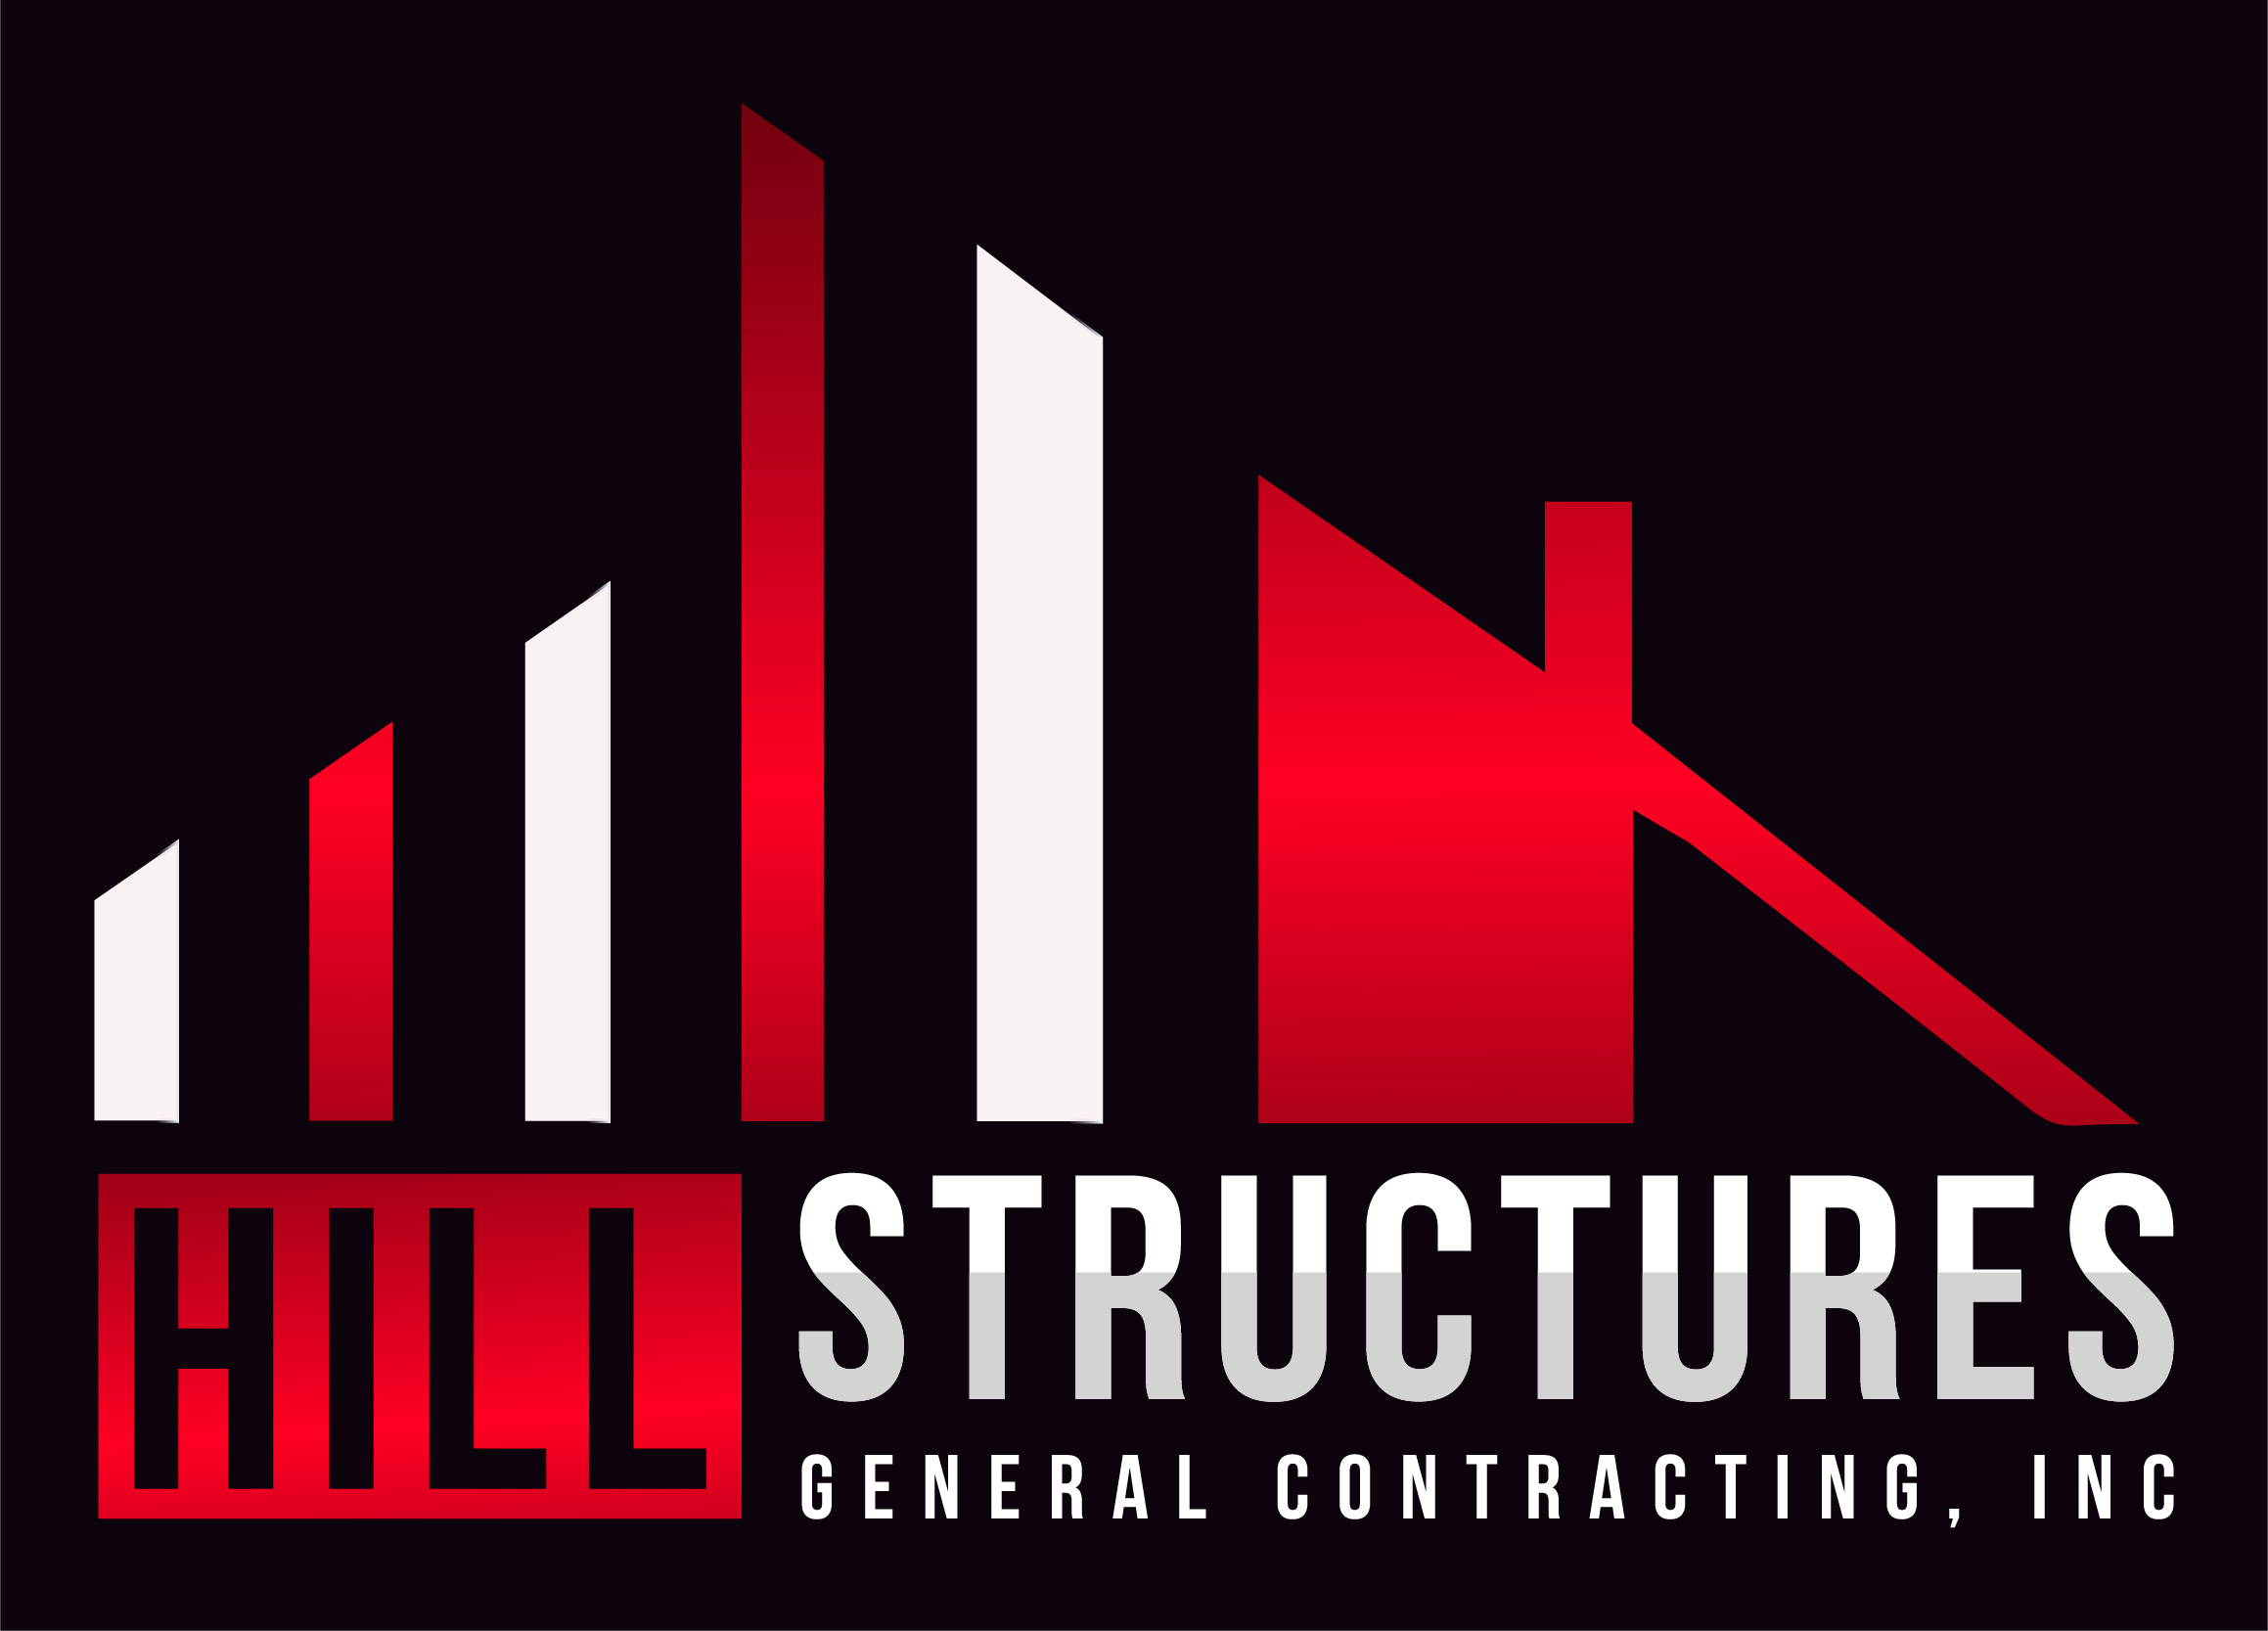 Hill Structures General Contracting, Inc.